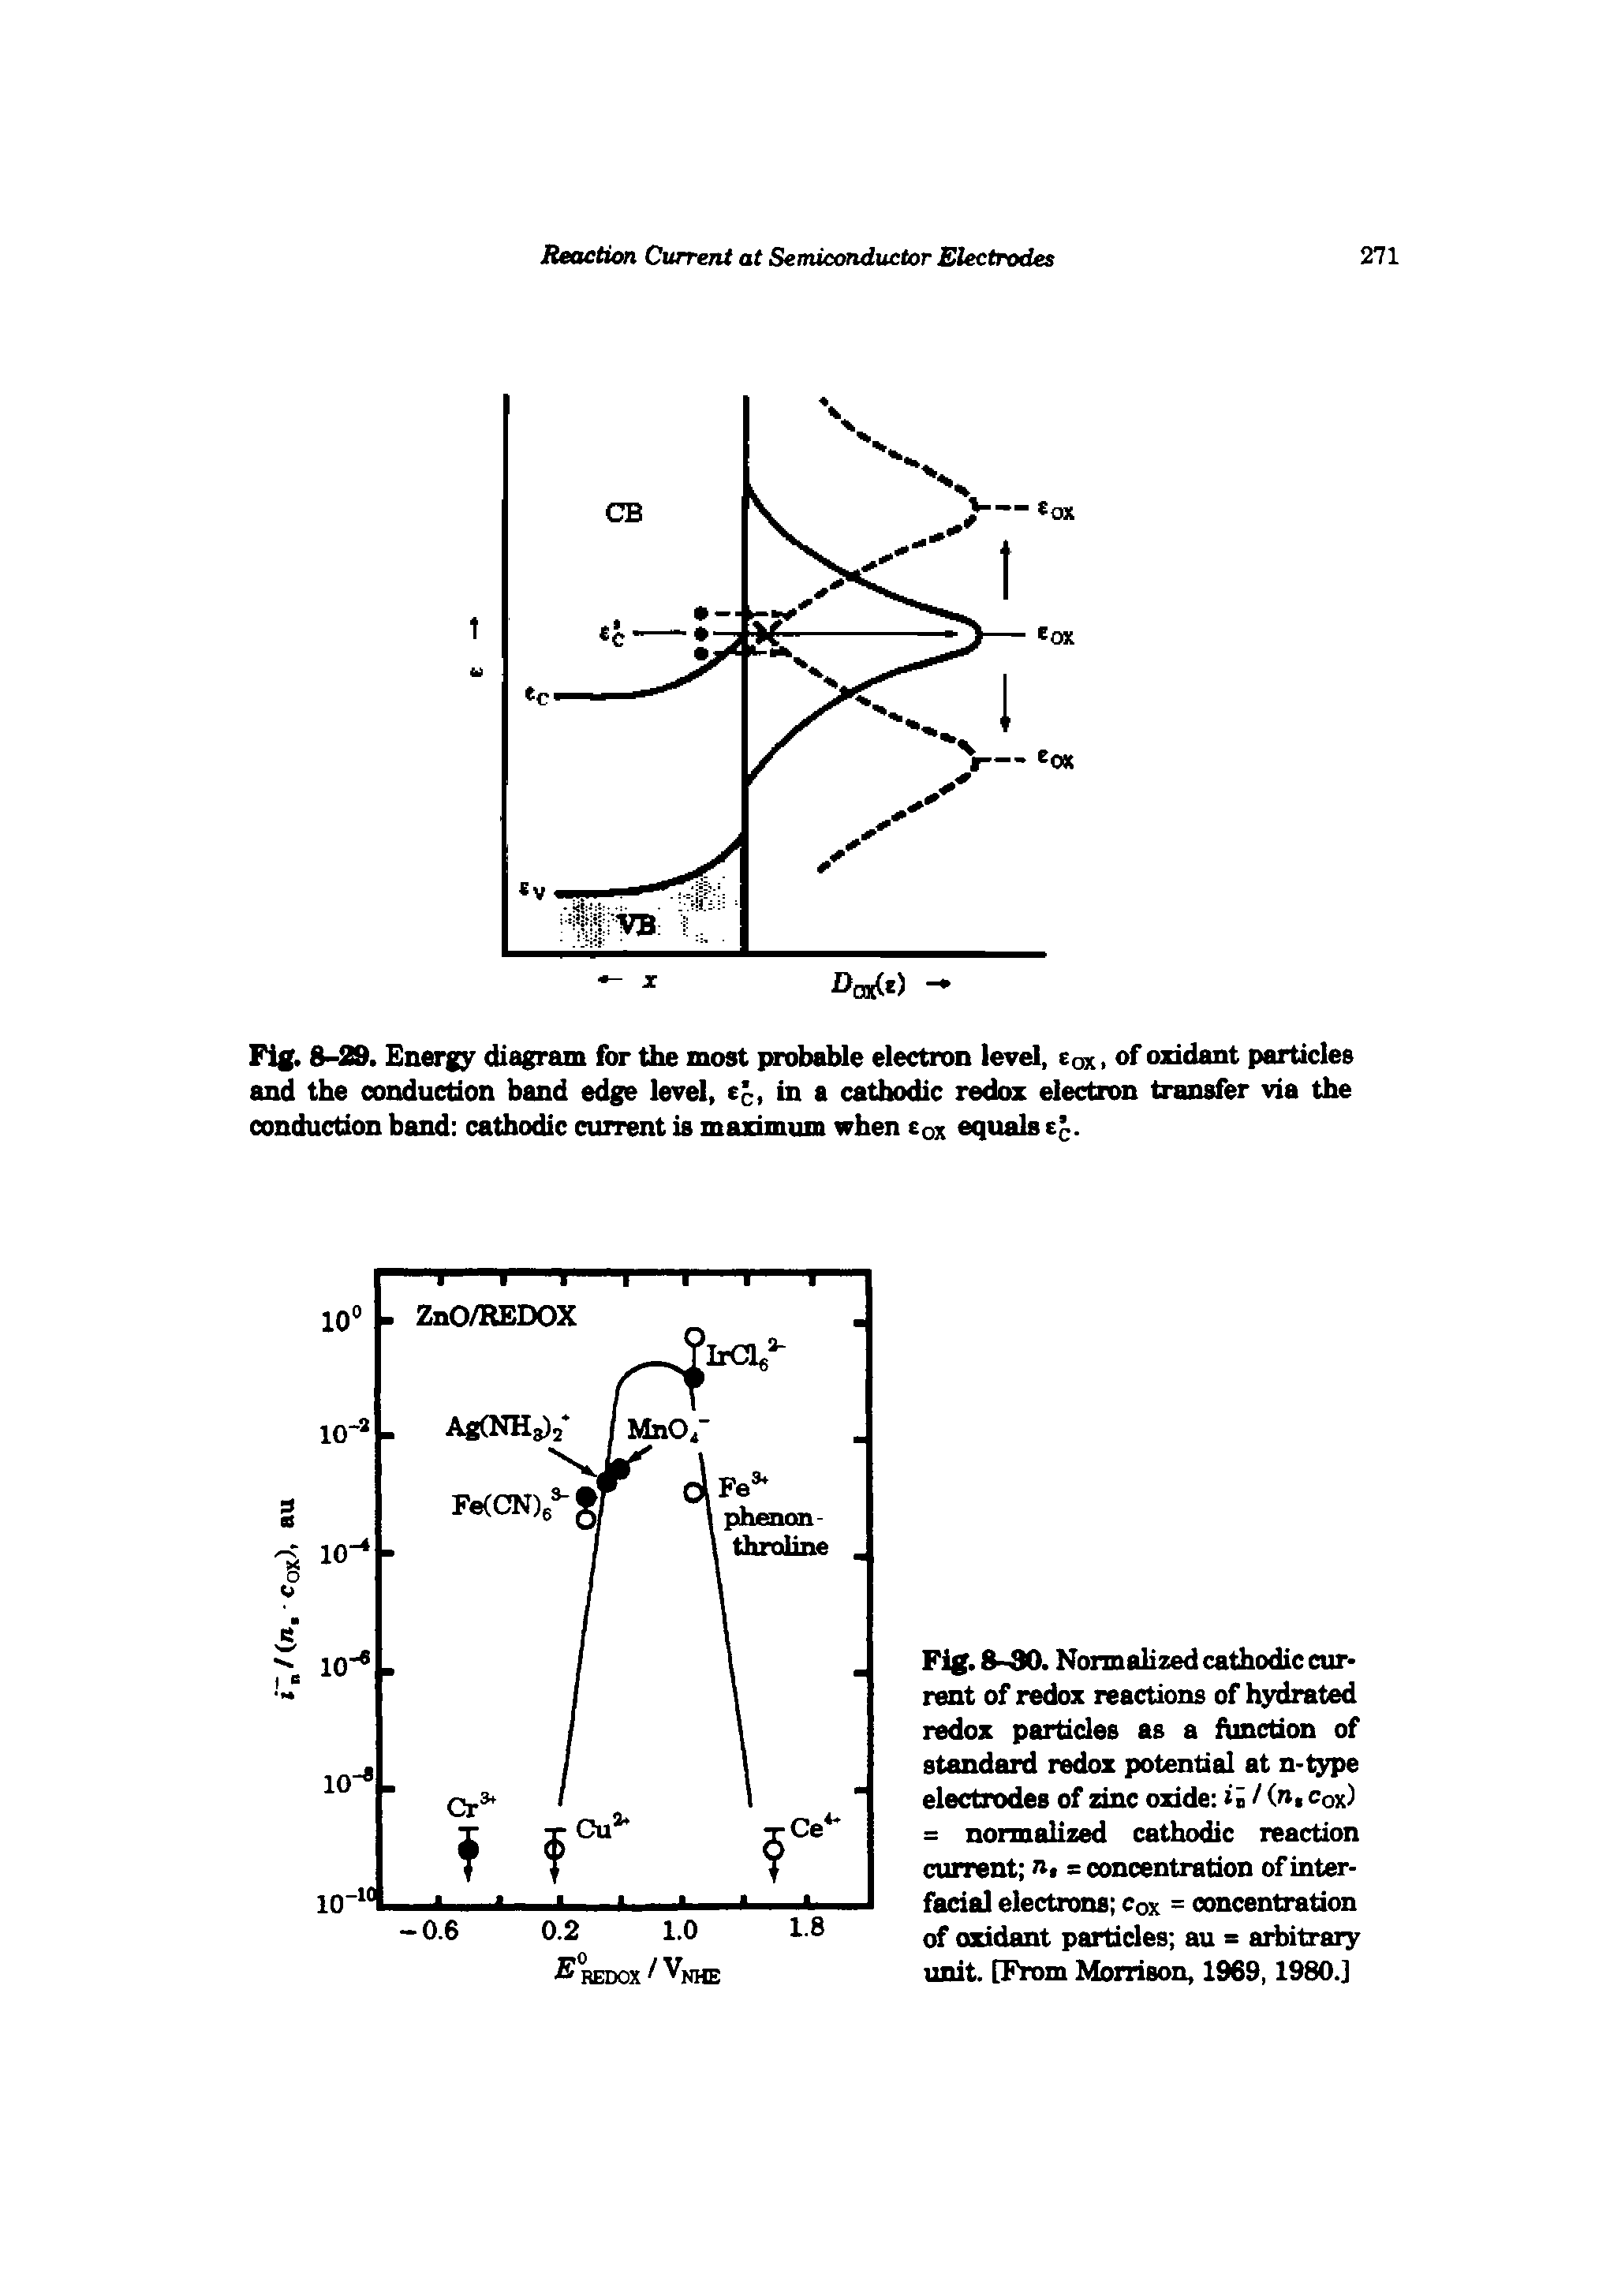 Fig. 8-90. Normalized cathodic cur> rent of redox reactions of hydrated redox particles as a function of standard redox potential at n-type electrodes of zinc oxide / (n, cqx) = normalized cathodic reaction current n, = concentration of interfacial electrons Cqx = concentration of oxidant particles au = arbitrary unit. [From Morrison, 1969,1980.]...